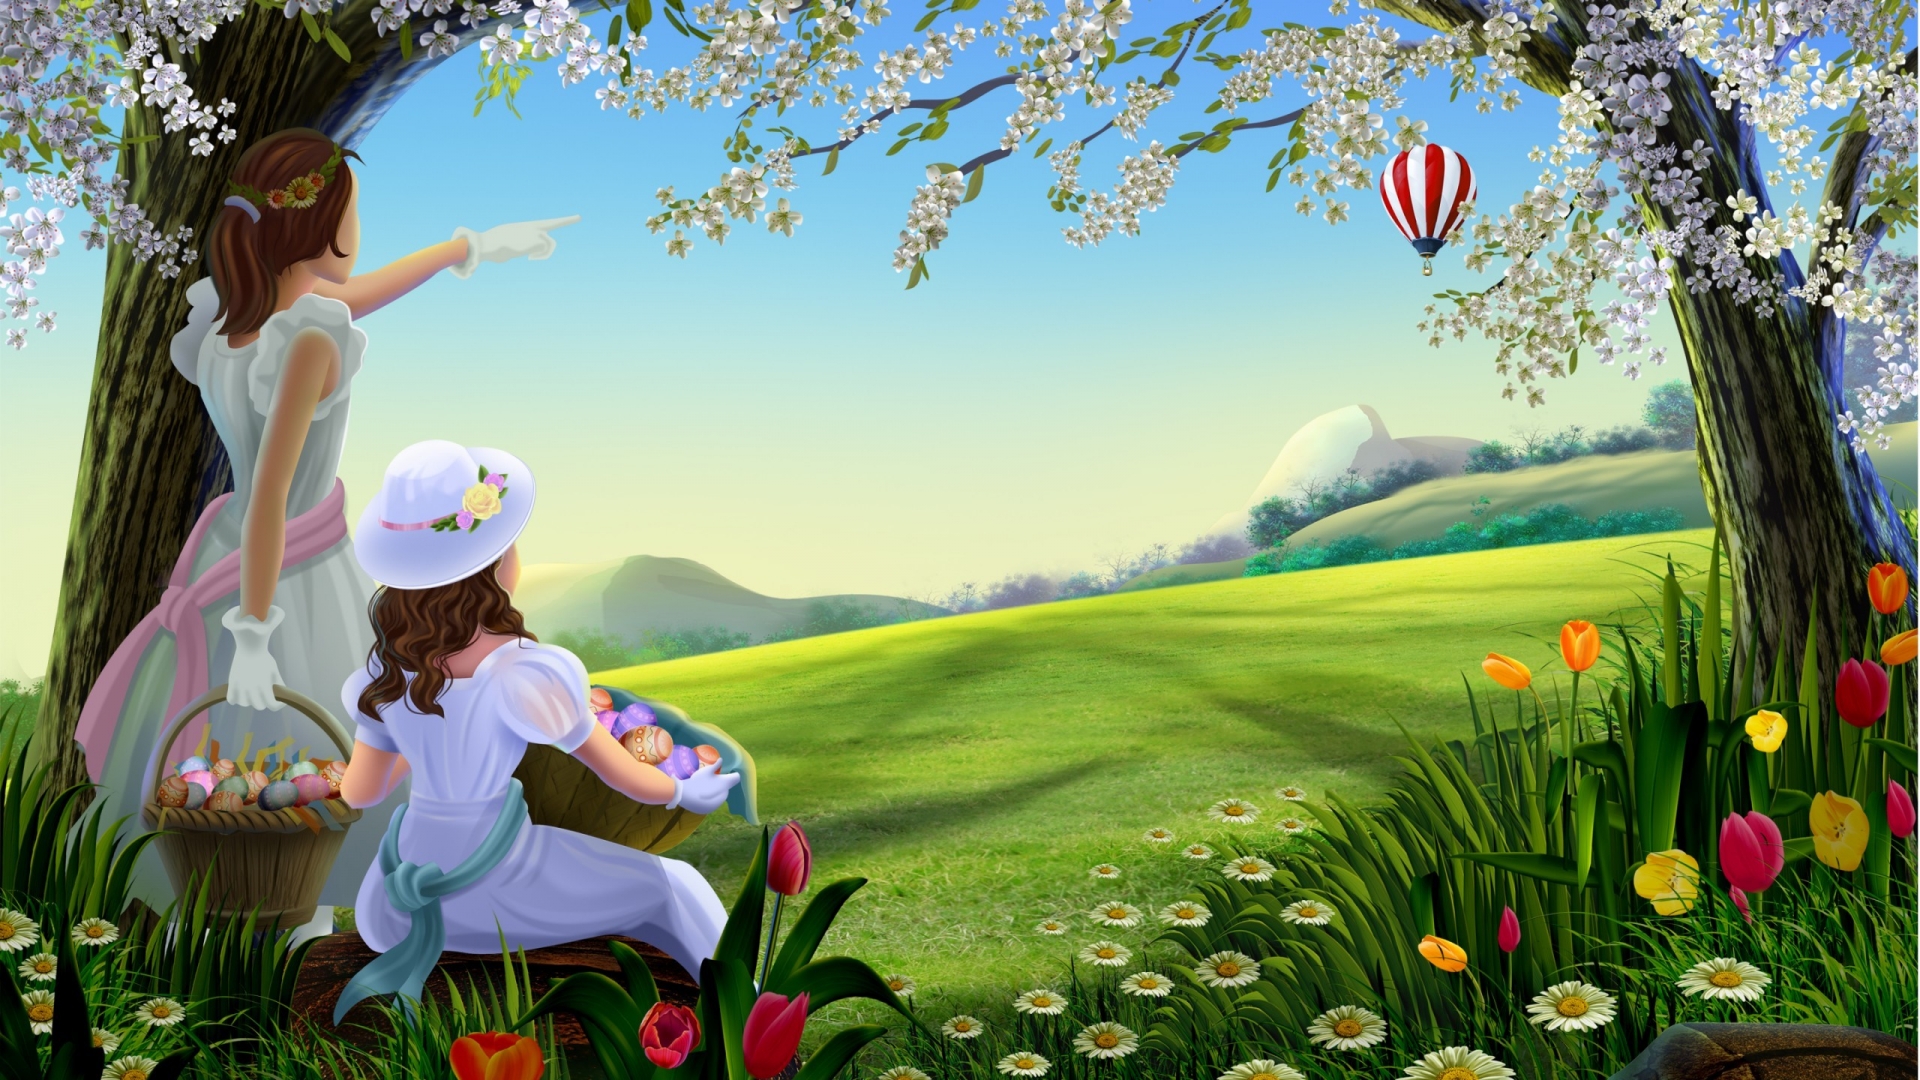 Amazing Spring Painting for 1920 x 1080 HDTV 1080p resolution